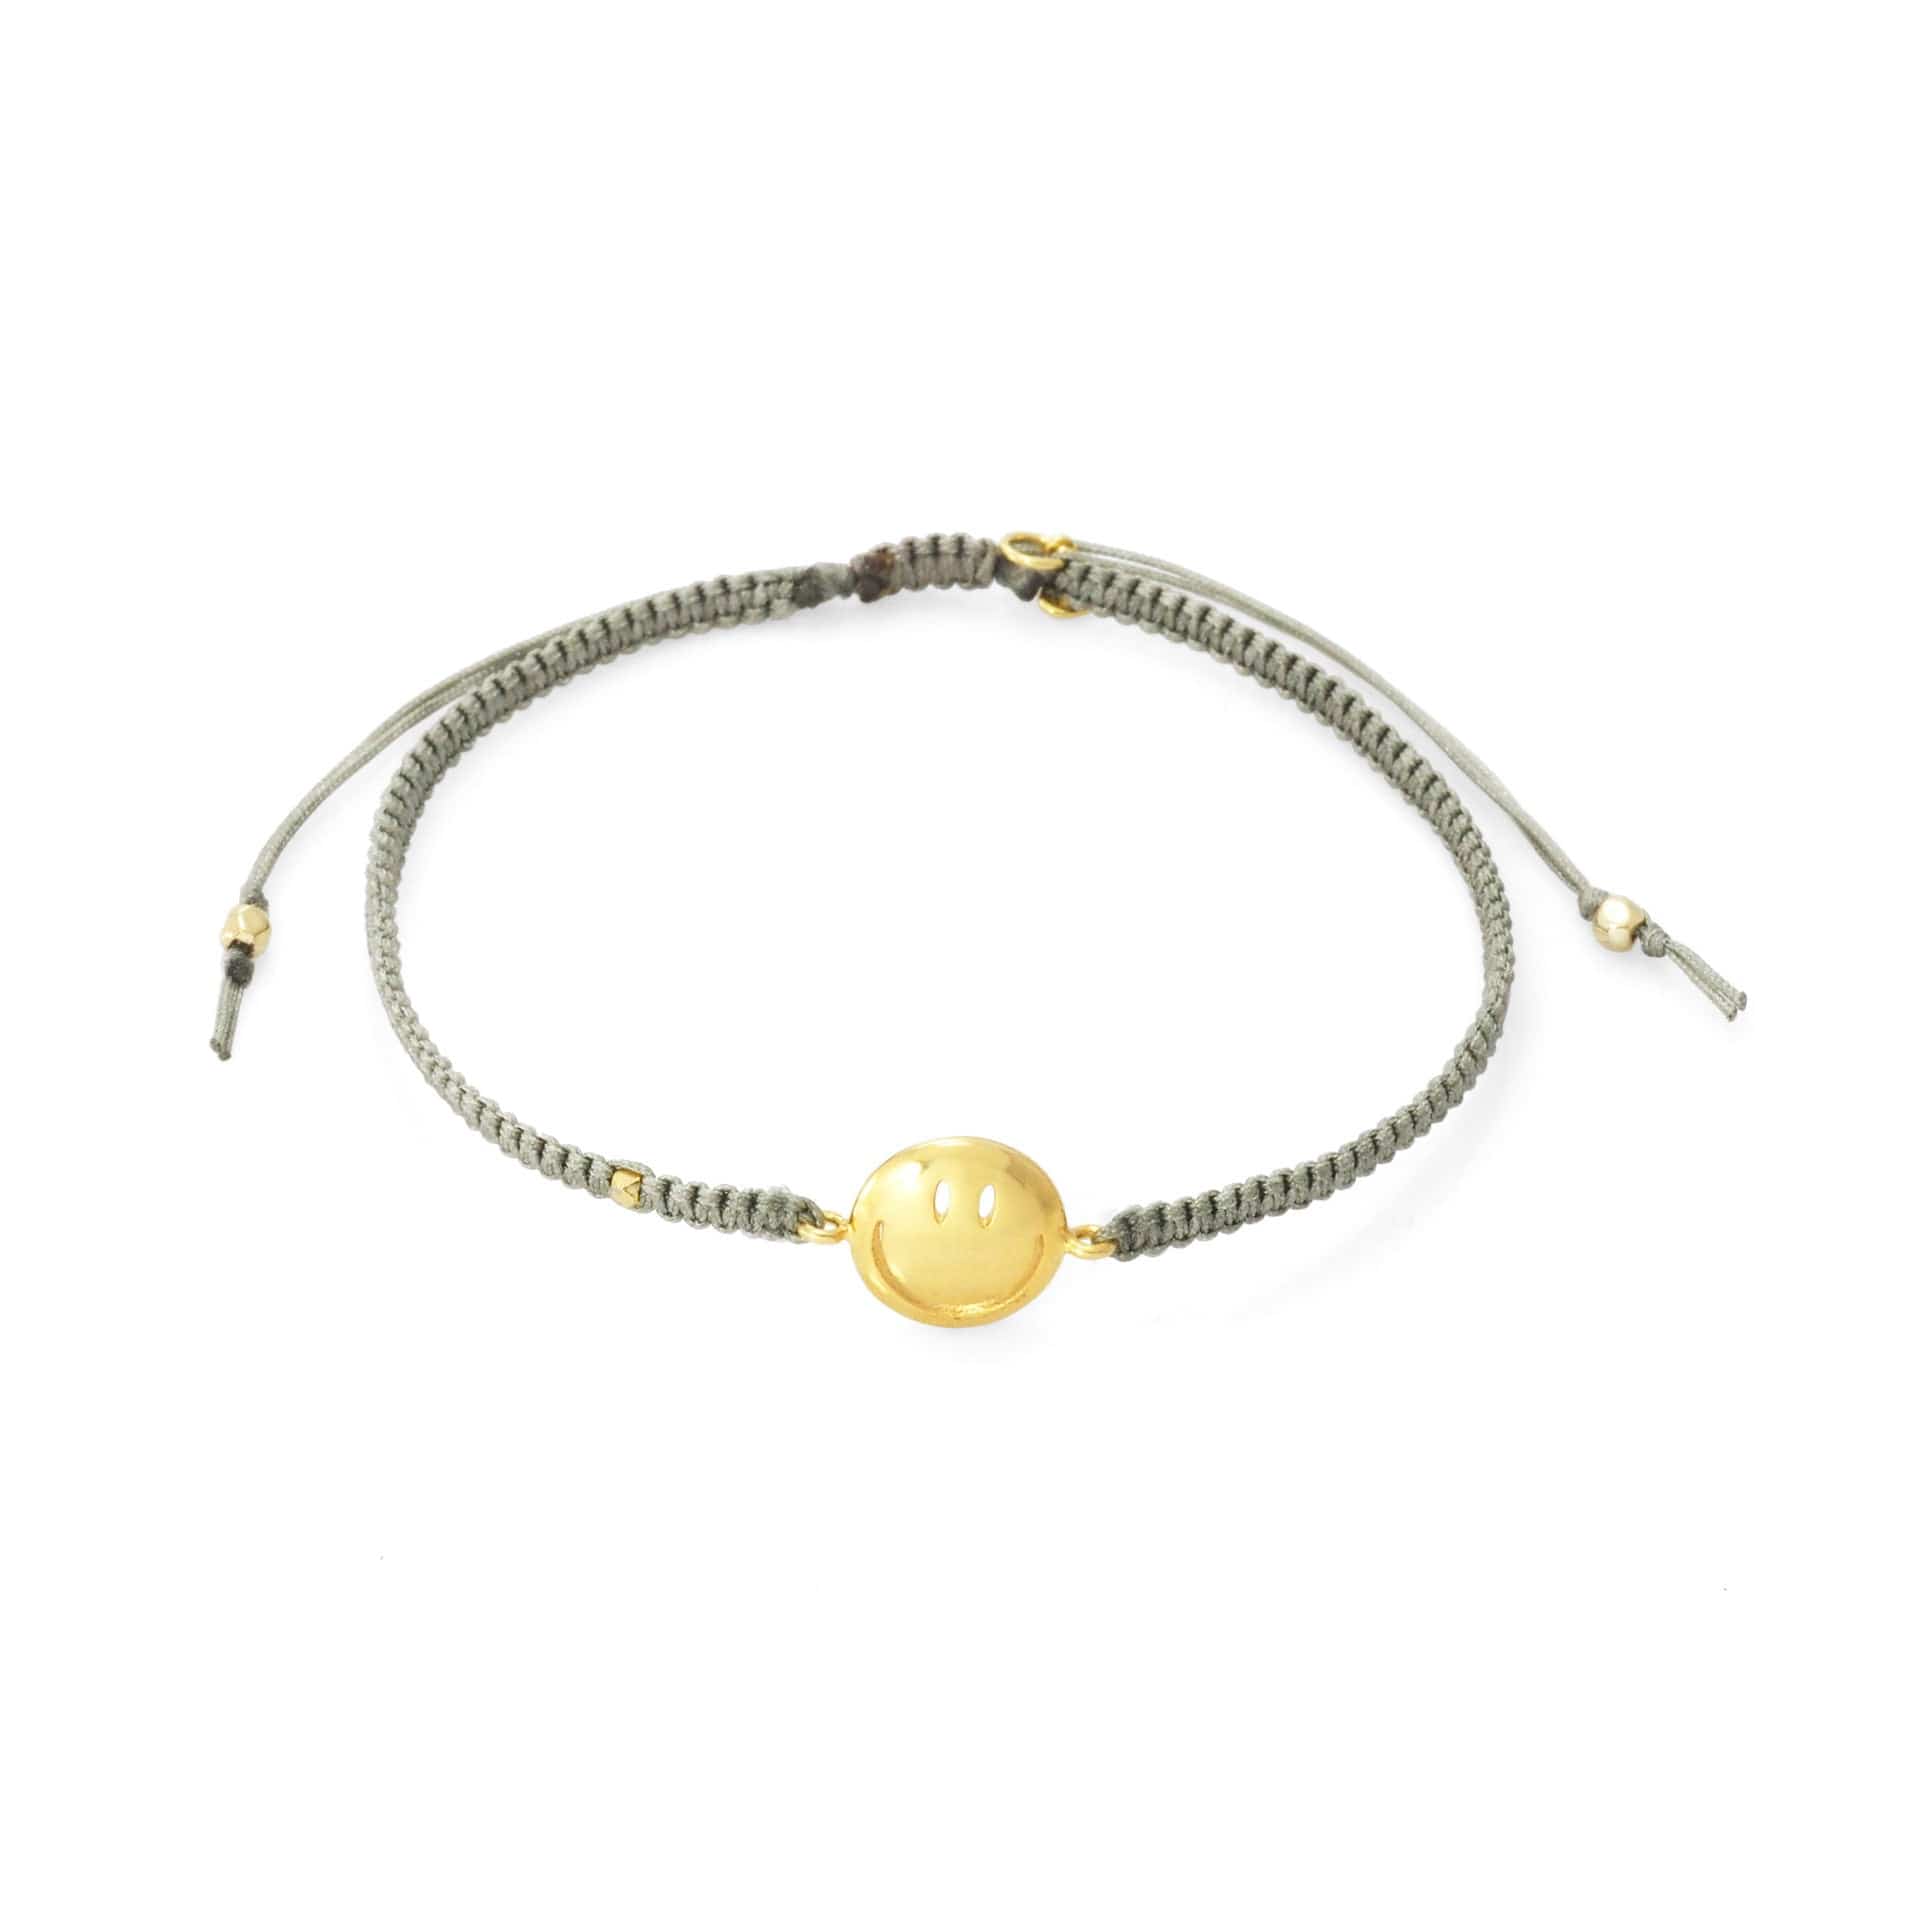 TAI JEWELRY Bracelet GOLD / LIGHT GREY Braided Silk Cord With Smiley Face Charm